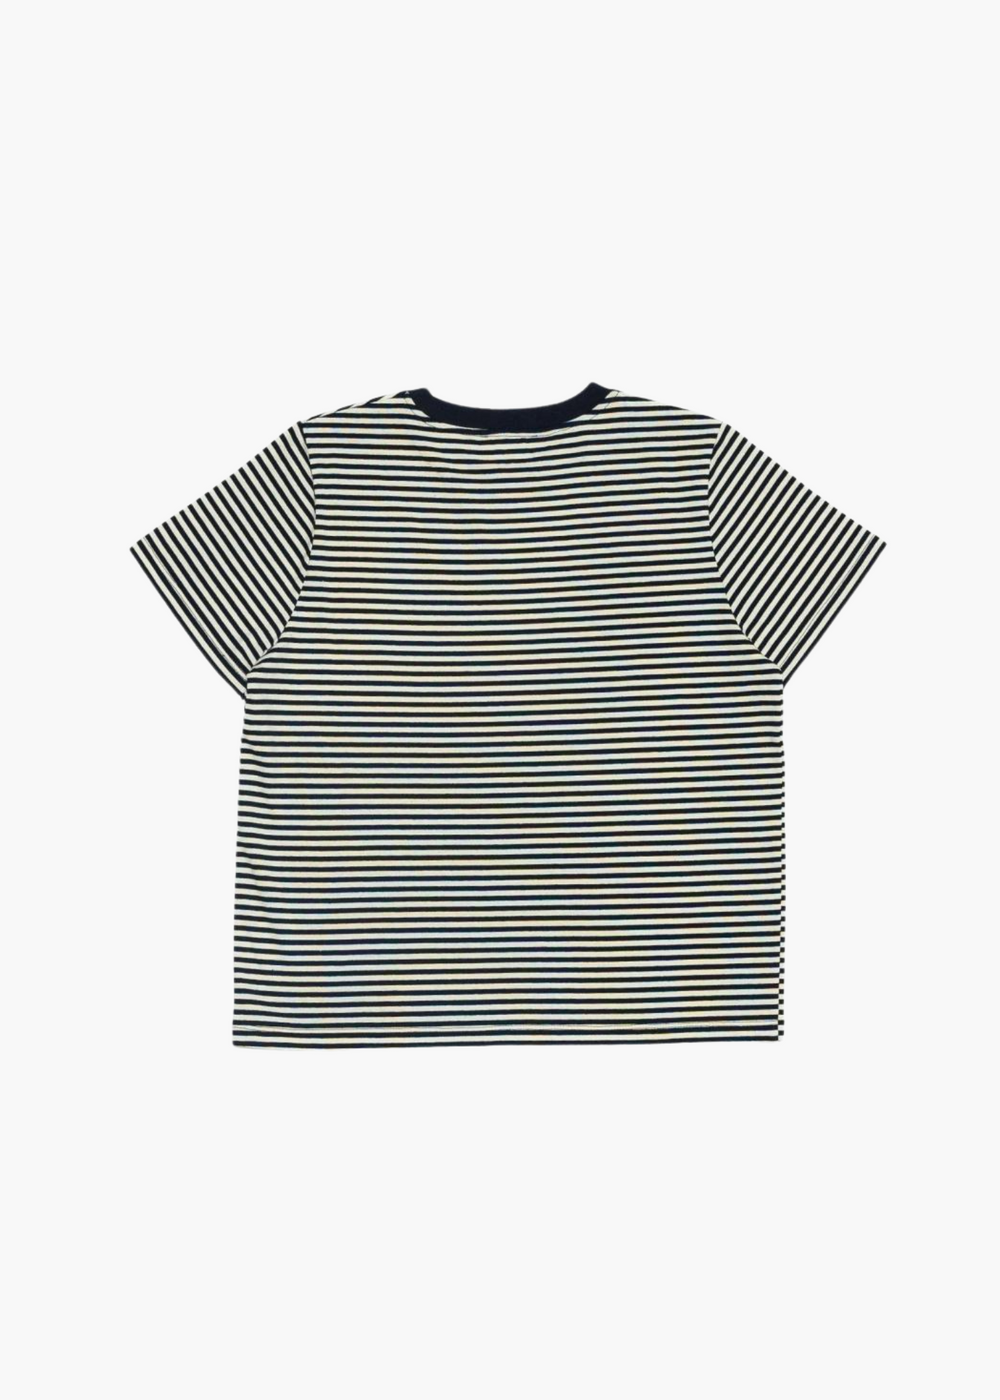 French Striped Crewneck in Navy